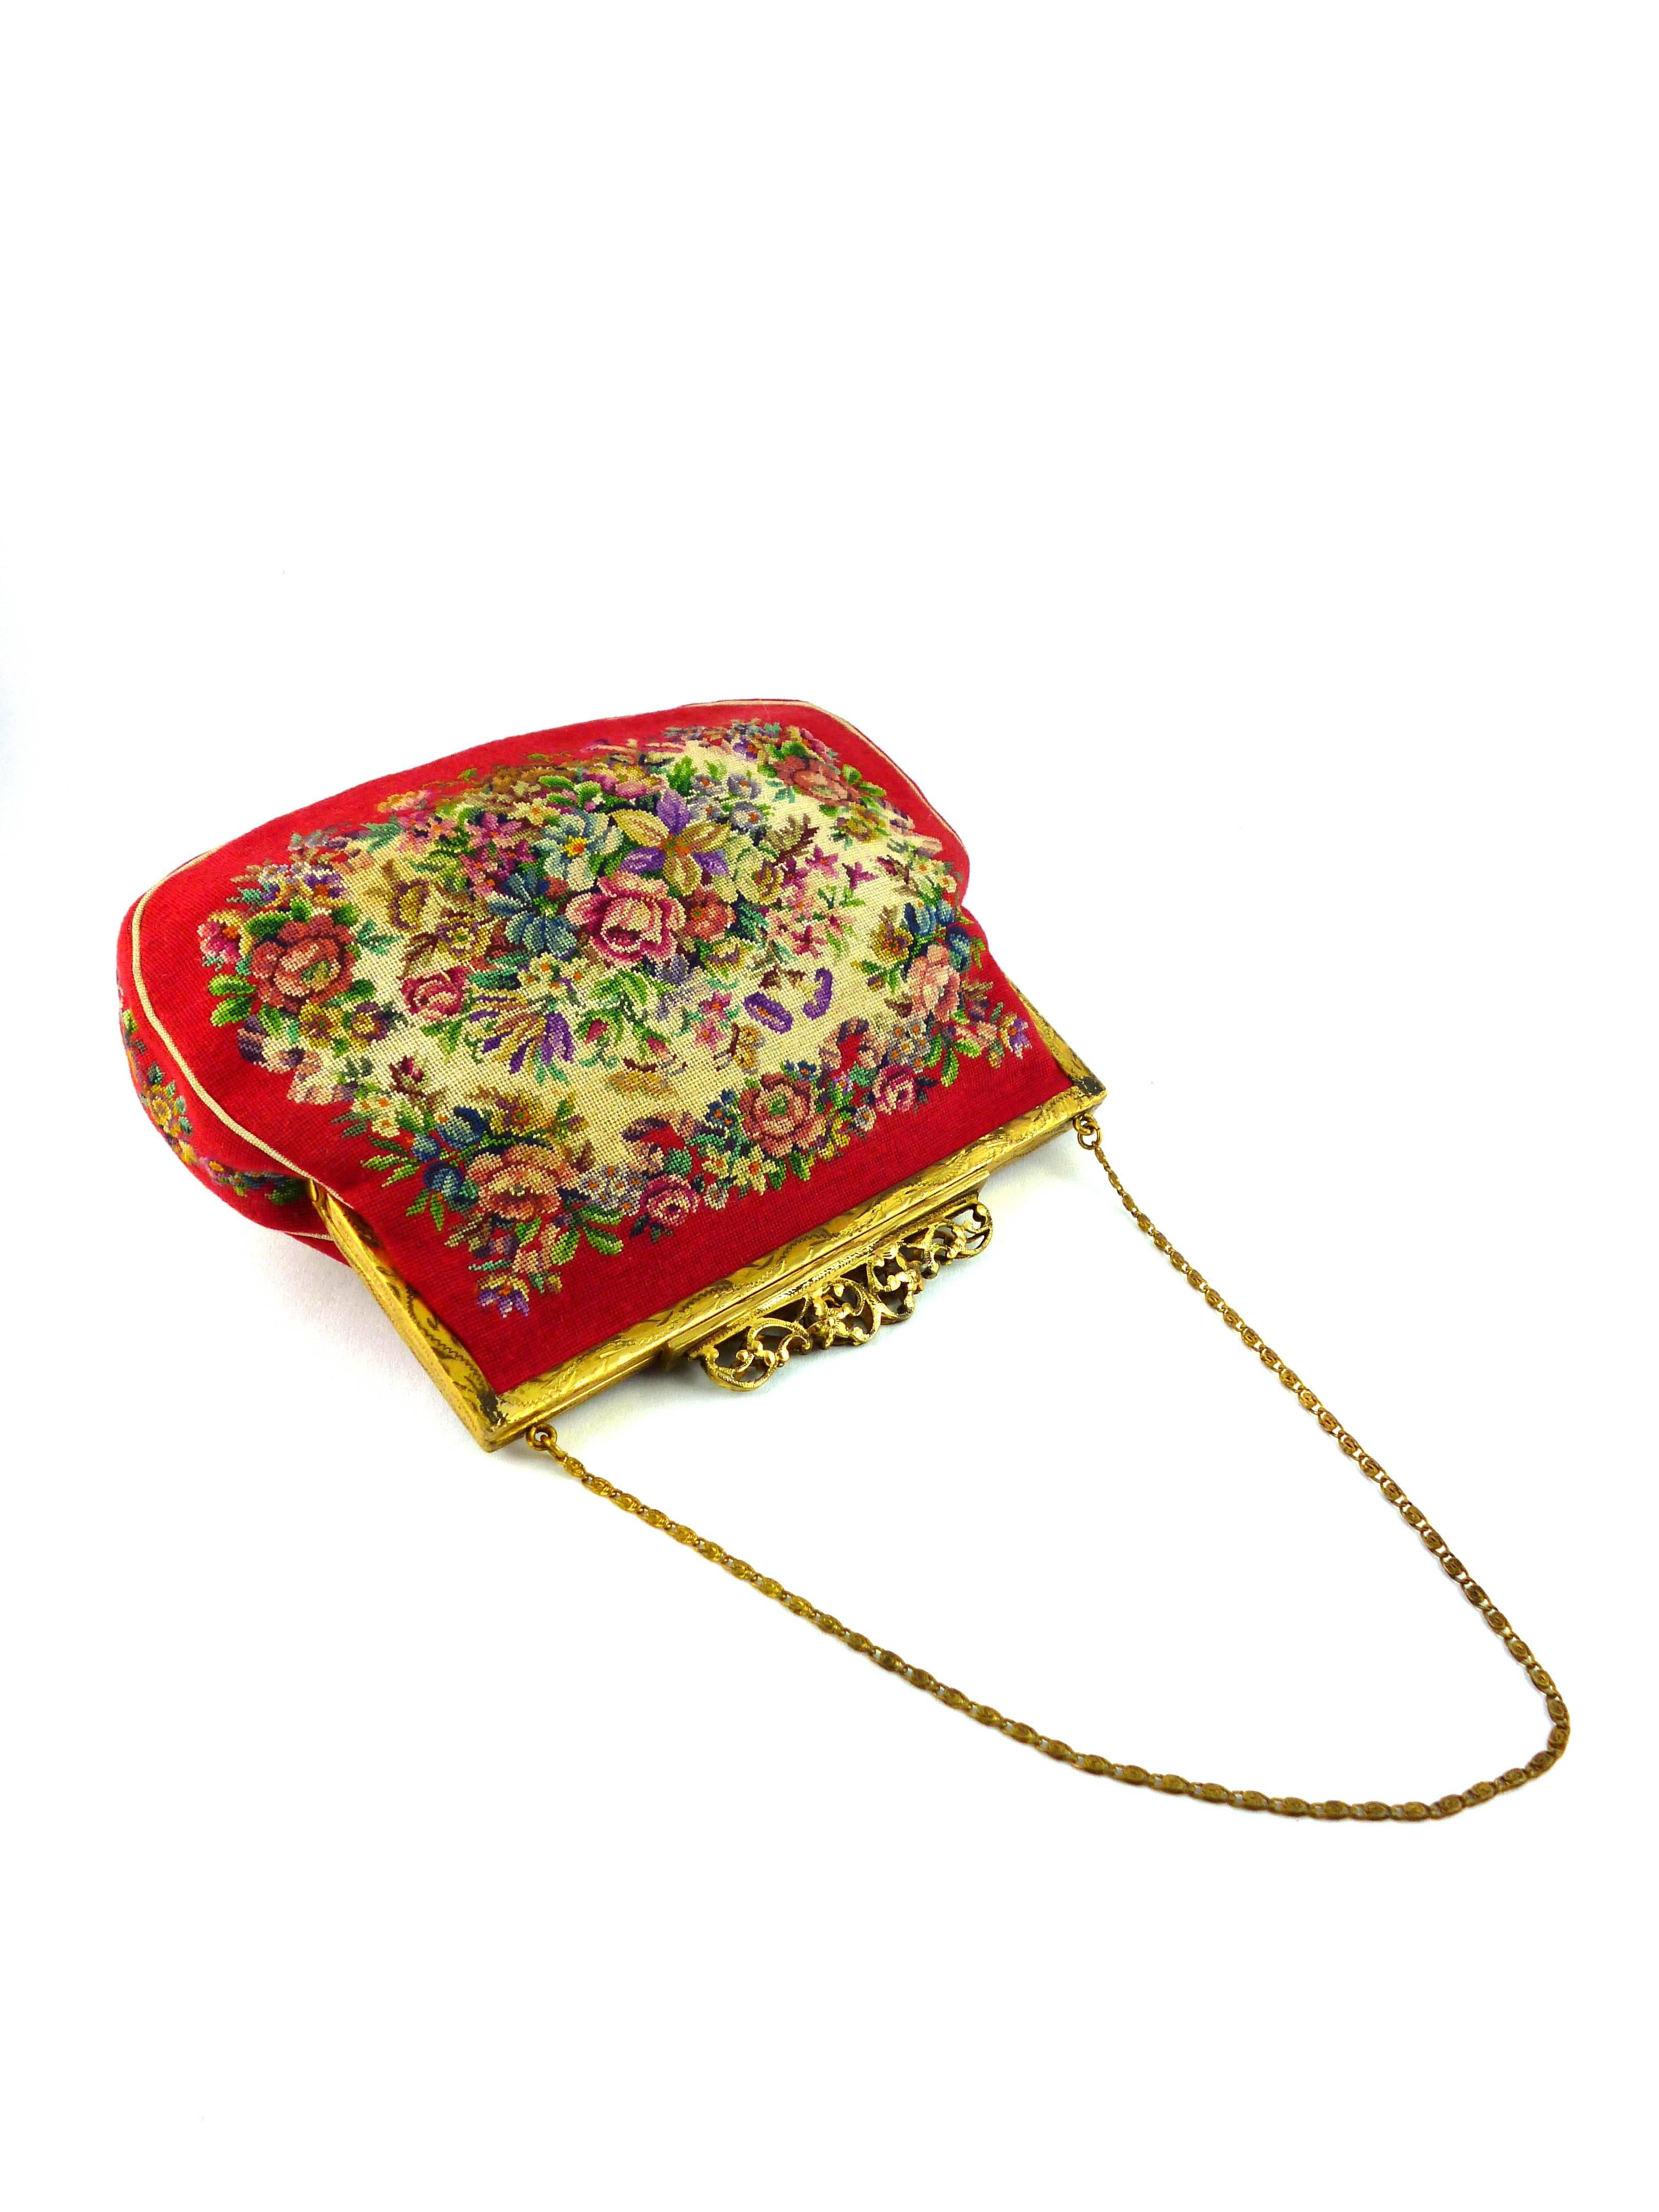 Gorgeous vintage floral design tapestry handbag.

This handbag features :
- Tiara-style top closure. 
- Gold tone hardware.
- Chain handle.
- Off-white leather lining.
- 2 inner pockets.

Indicative measurements : total length (incl.